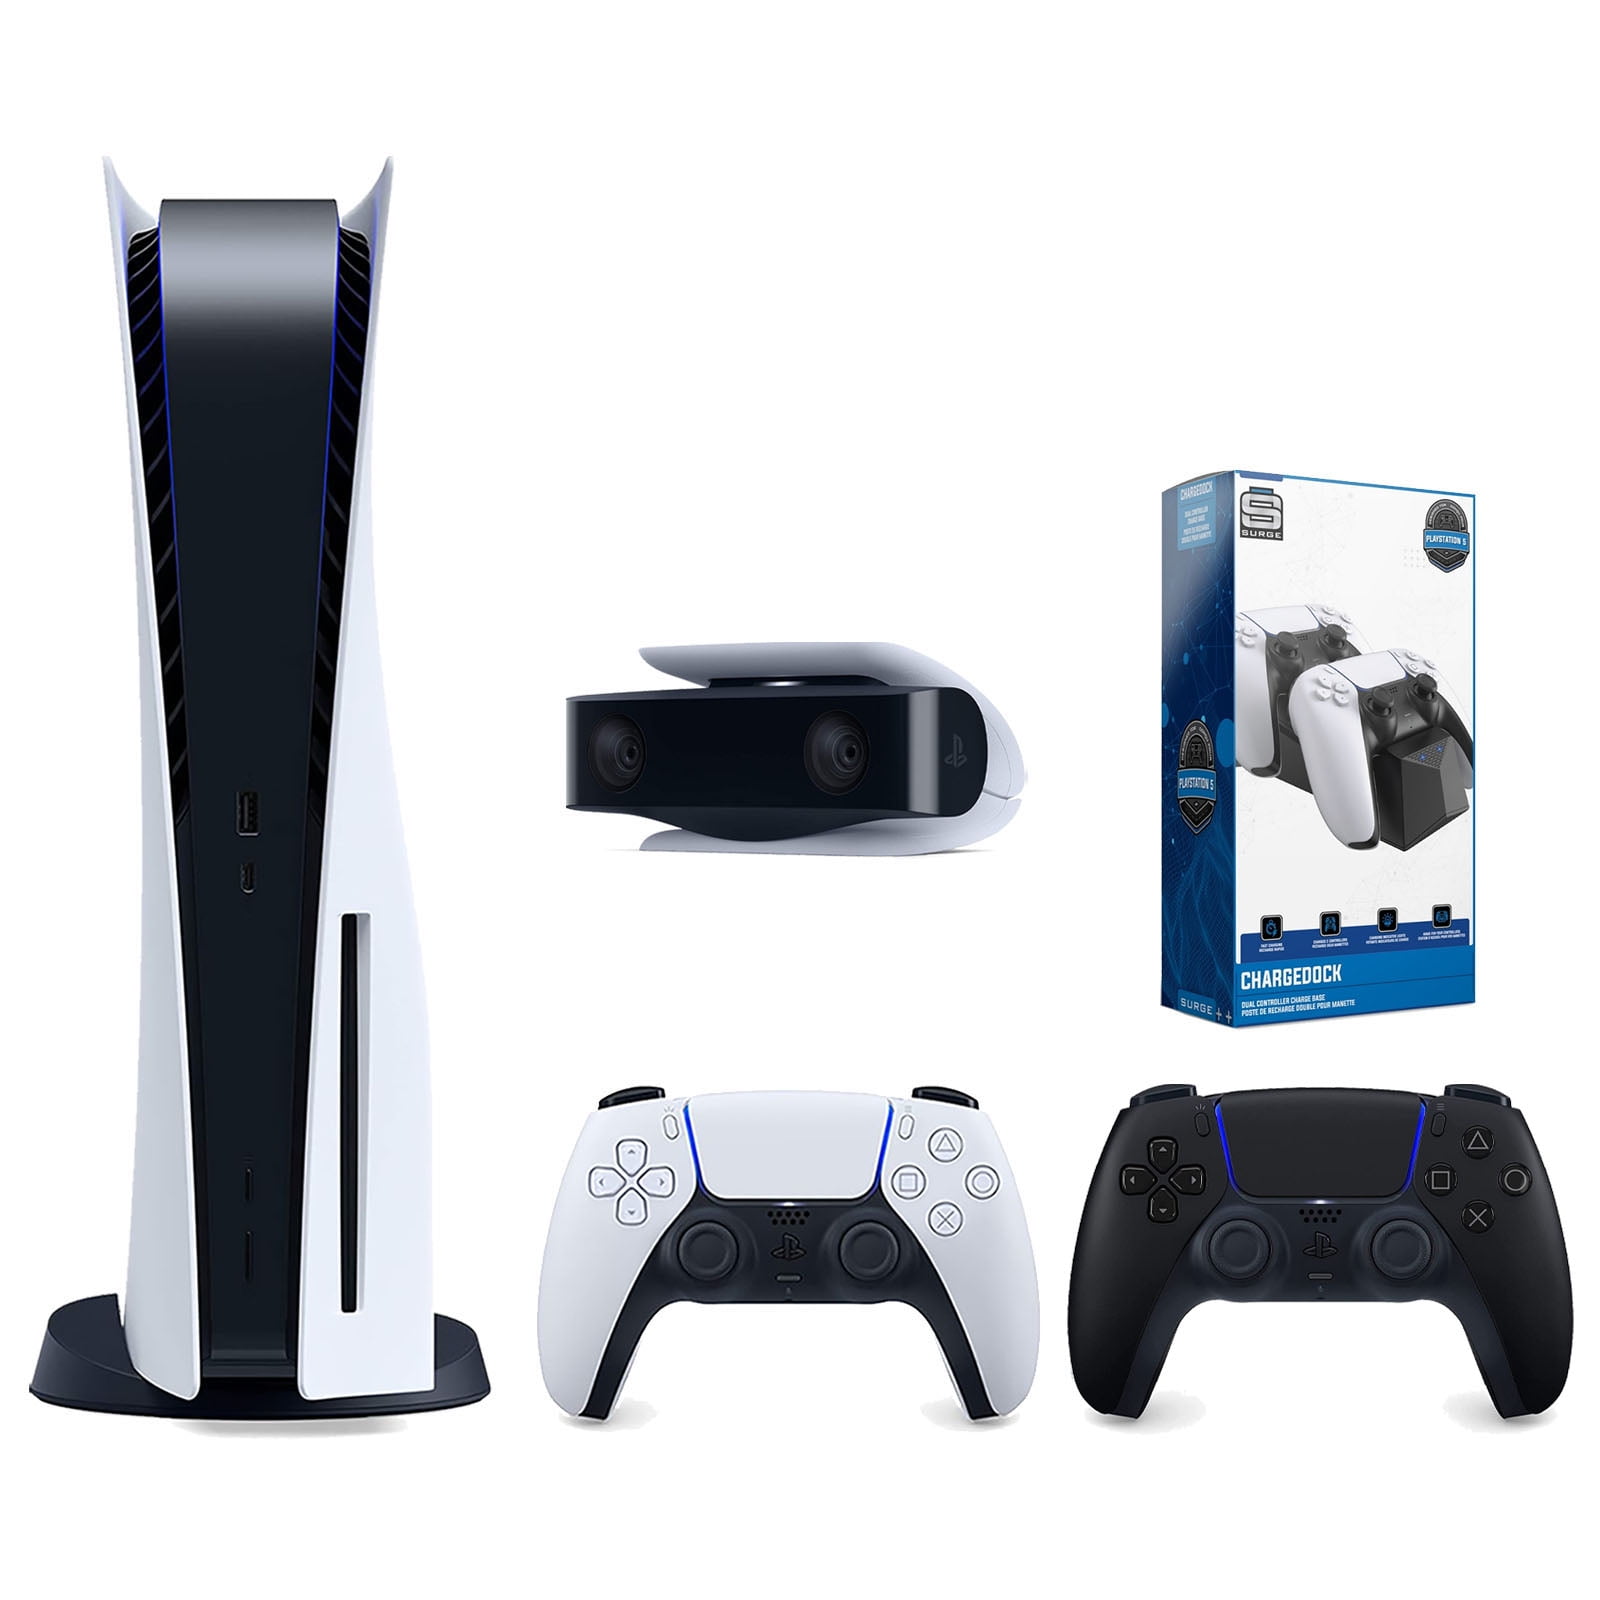 PS5 Bundle - Includes Playstation 5 Digital Console, Additional DualSense  Controller and HD Camera for PS5 